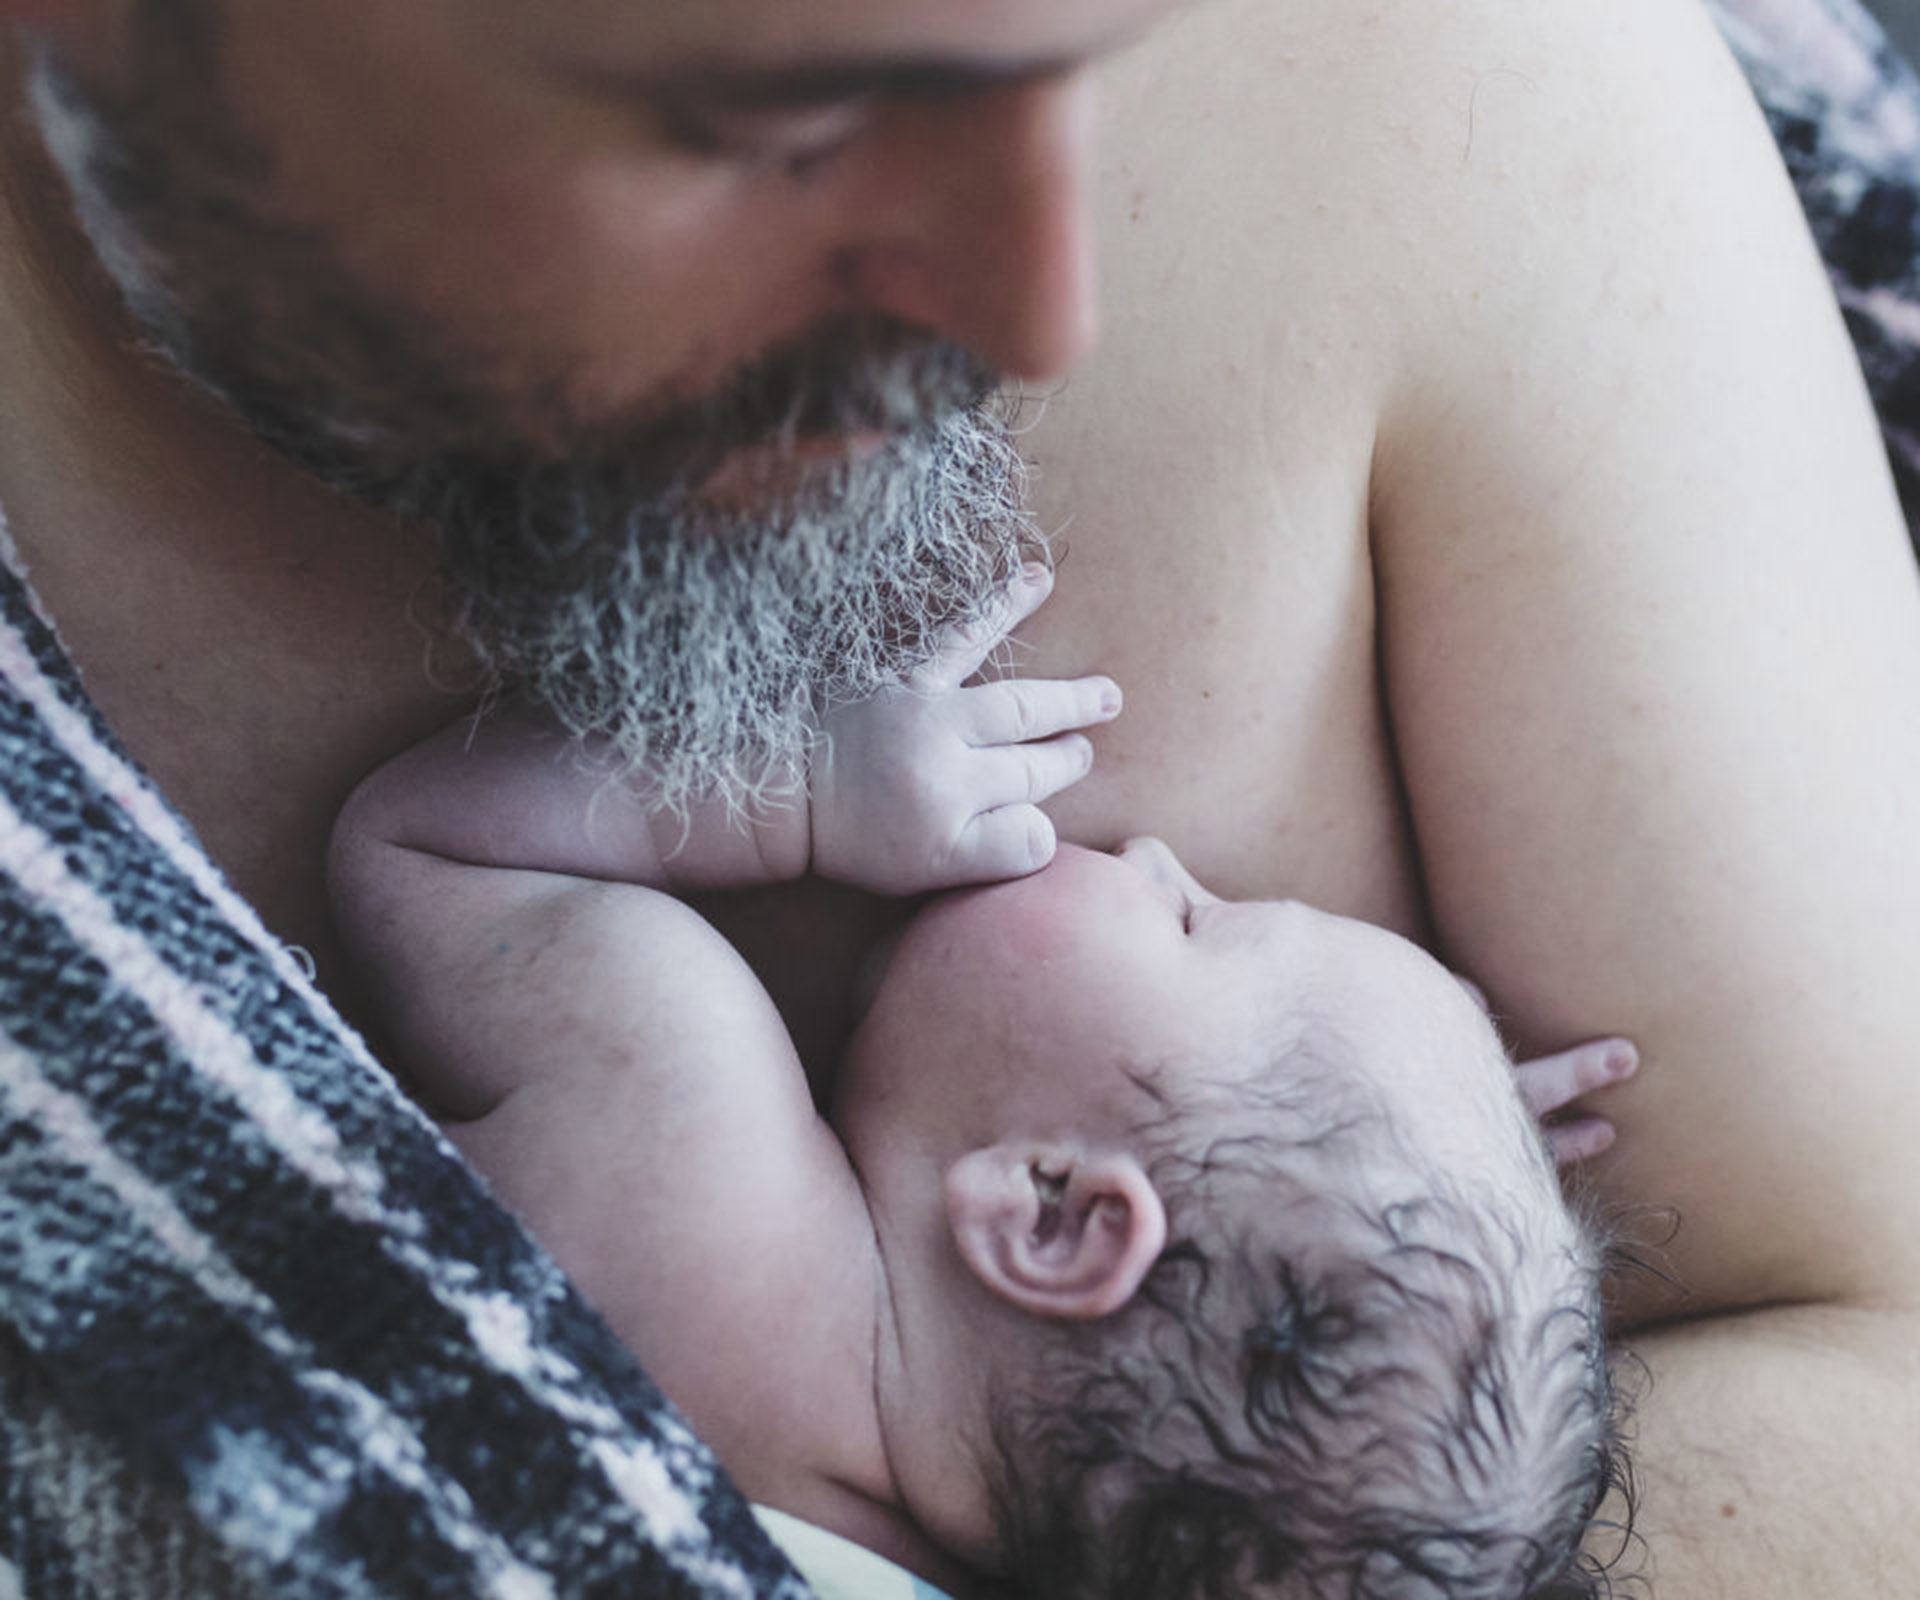 Amazing photos that truly capture a father’s love